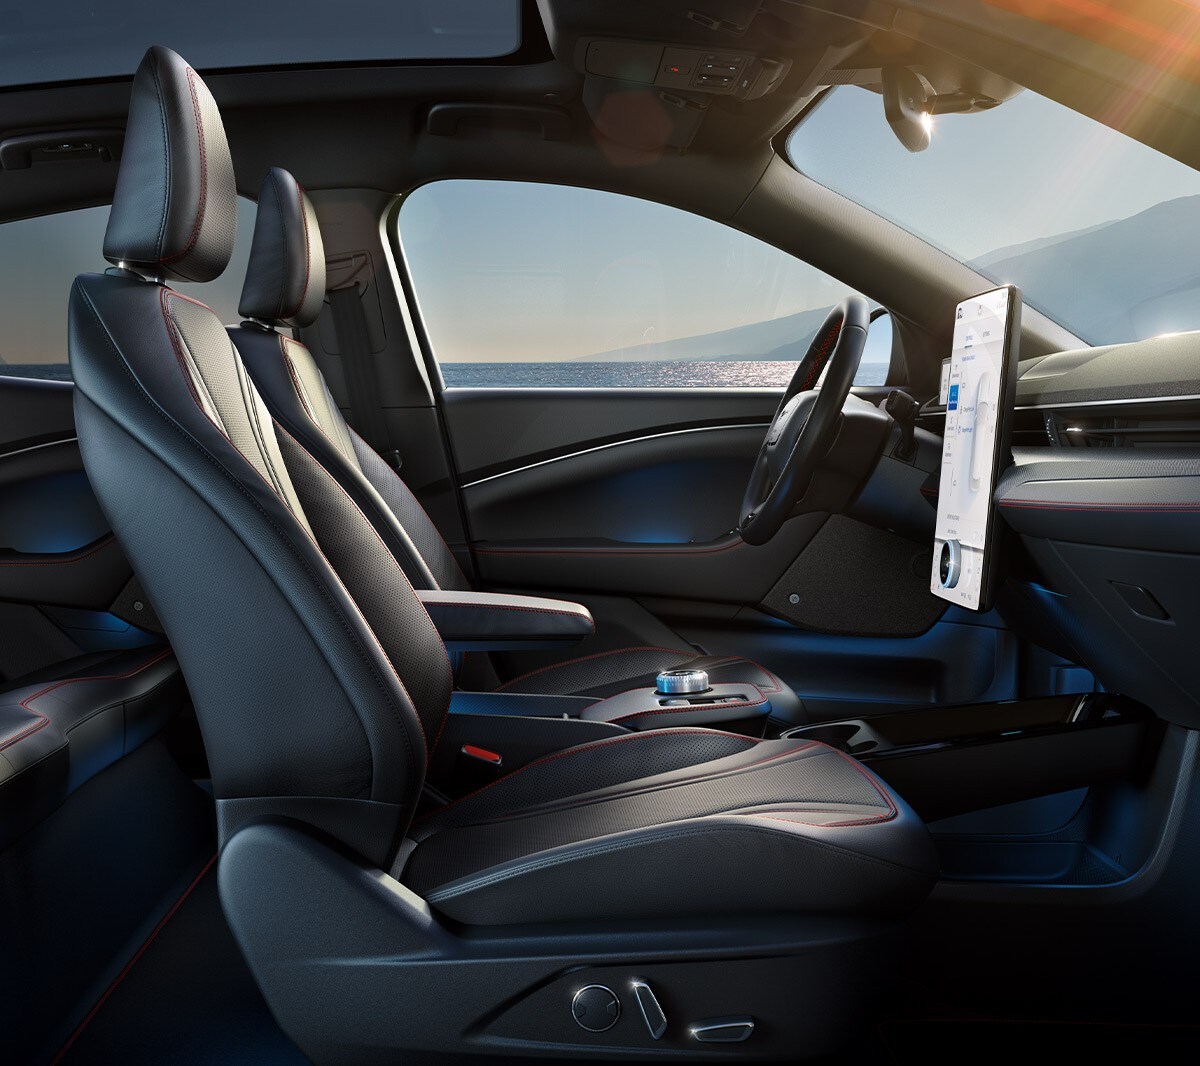 All-New Ford Mustang Mach-E interior showing seats and spacious interior